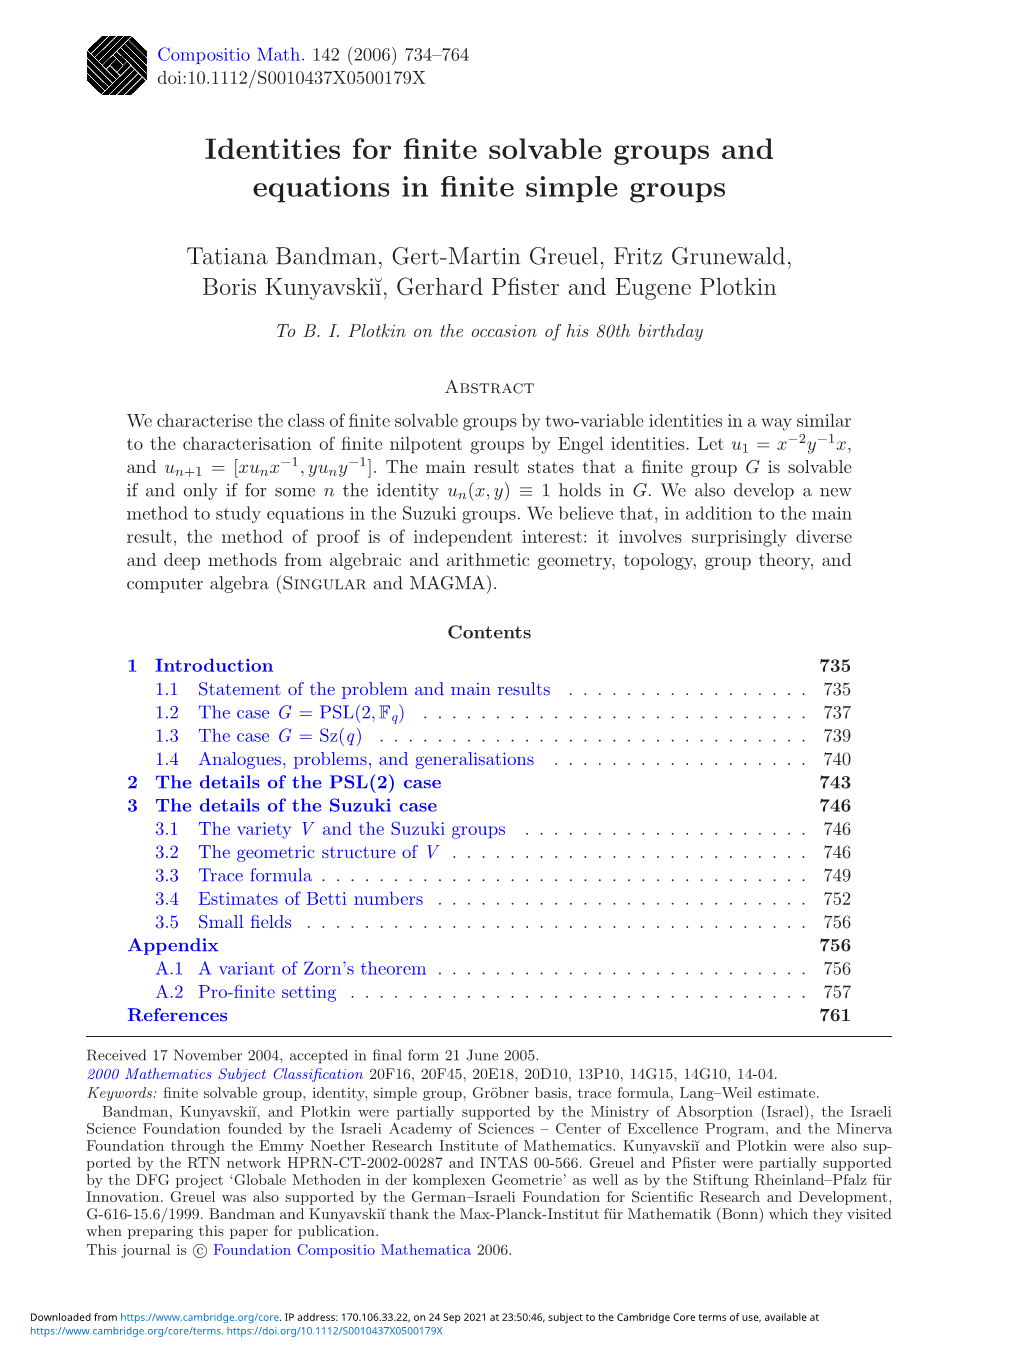 Identities for Finite Solvable Groups and Equations in Finite Simple Groups